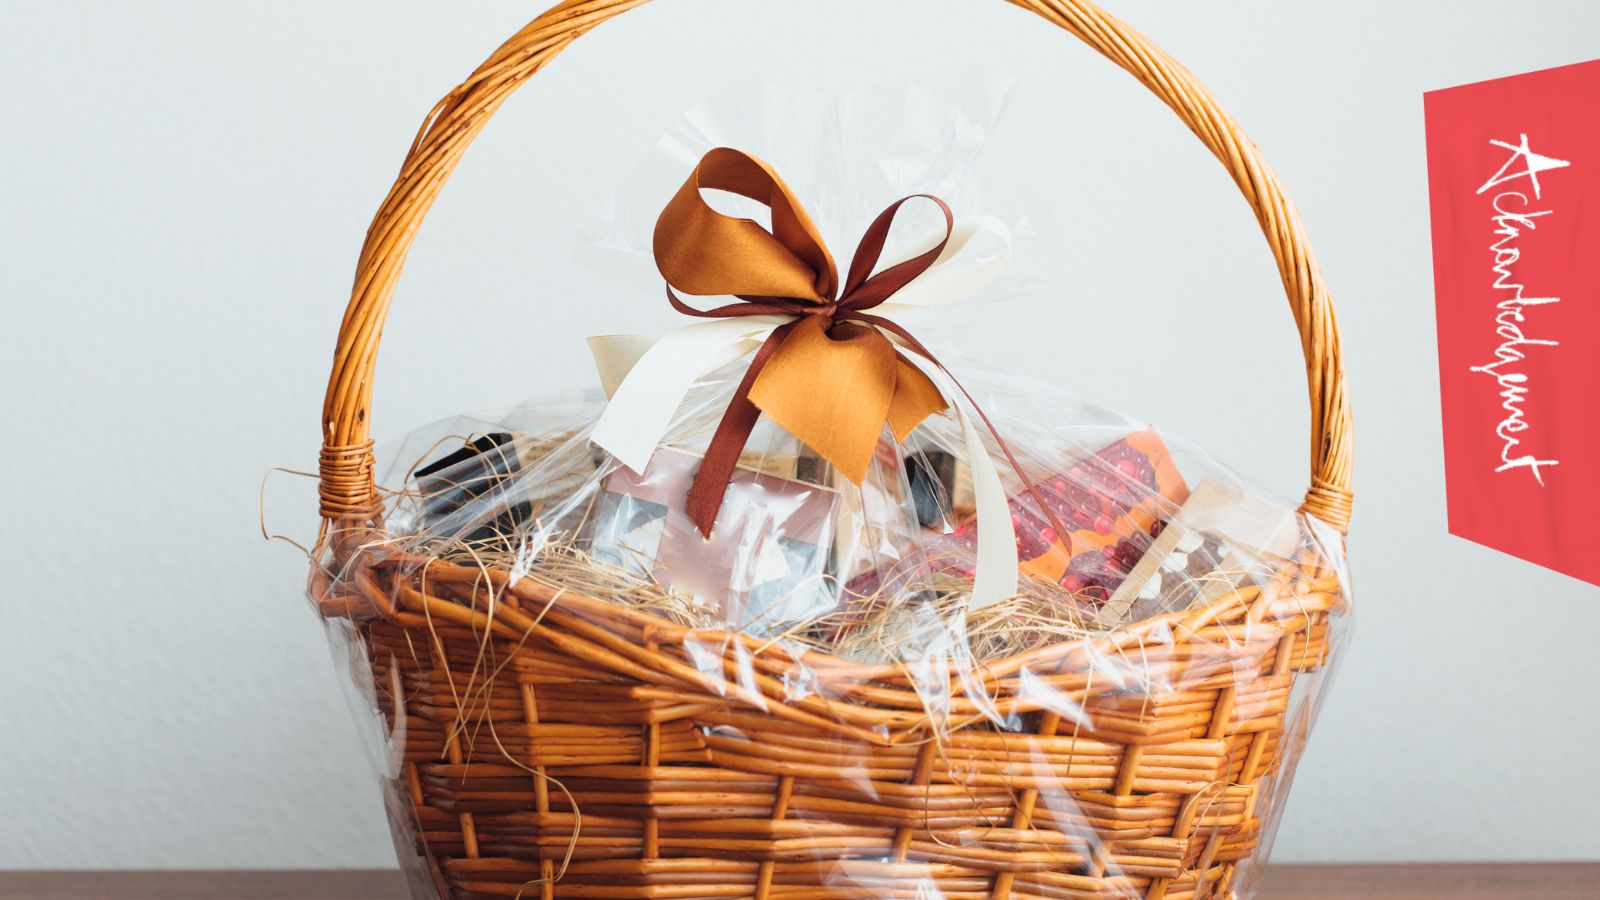 A gift hamper with a bundle of things inside